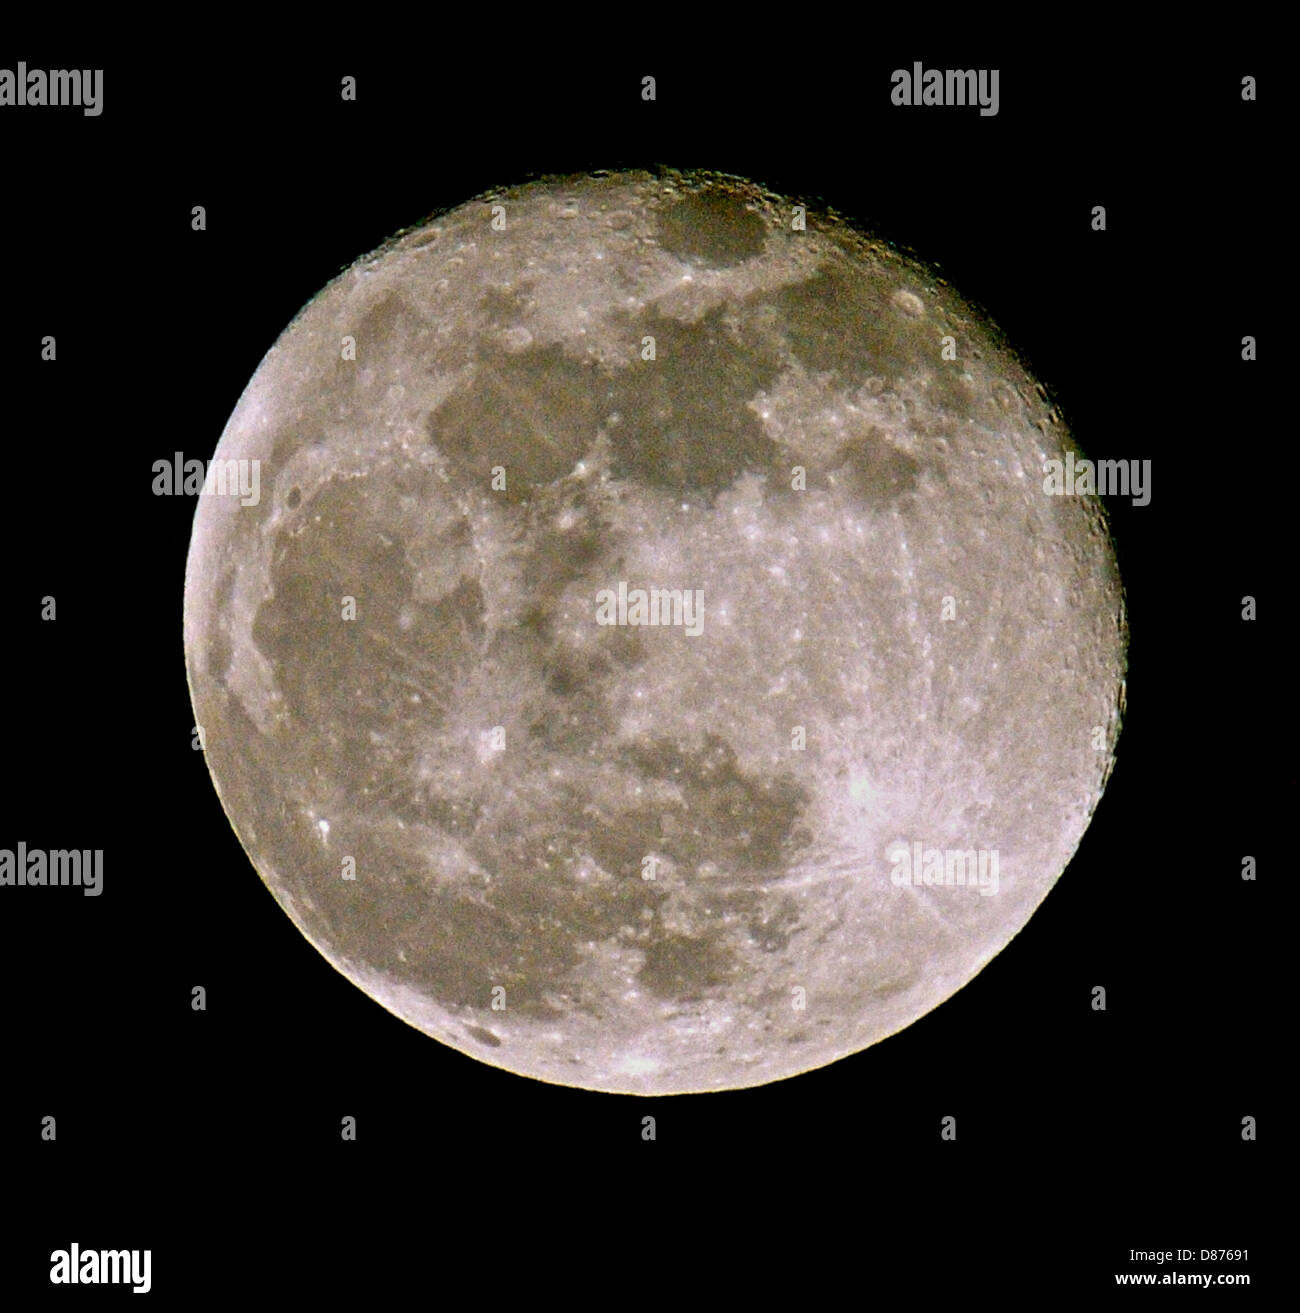 The moon, earth's satellite. This is a full moon photographed in the middle of spring in the southern part of Great Britain just after the full moon stage to show detail on the rim. Stock Photo